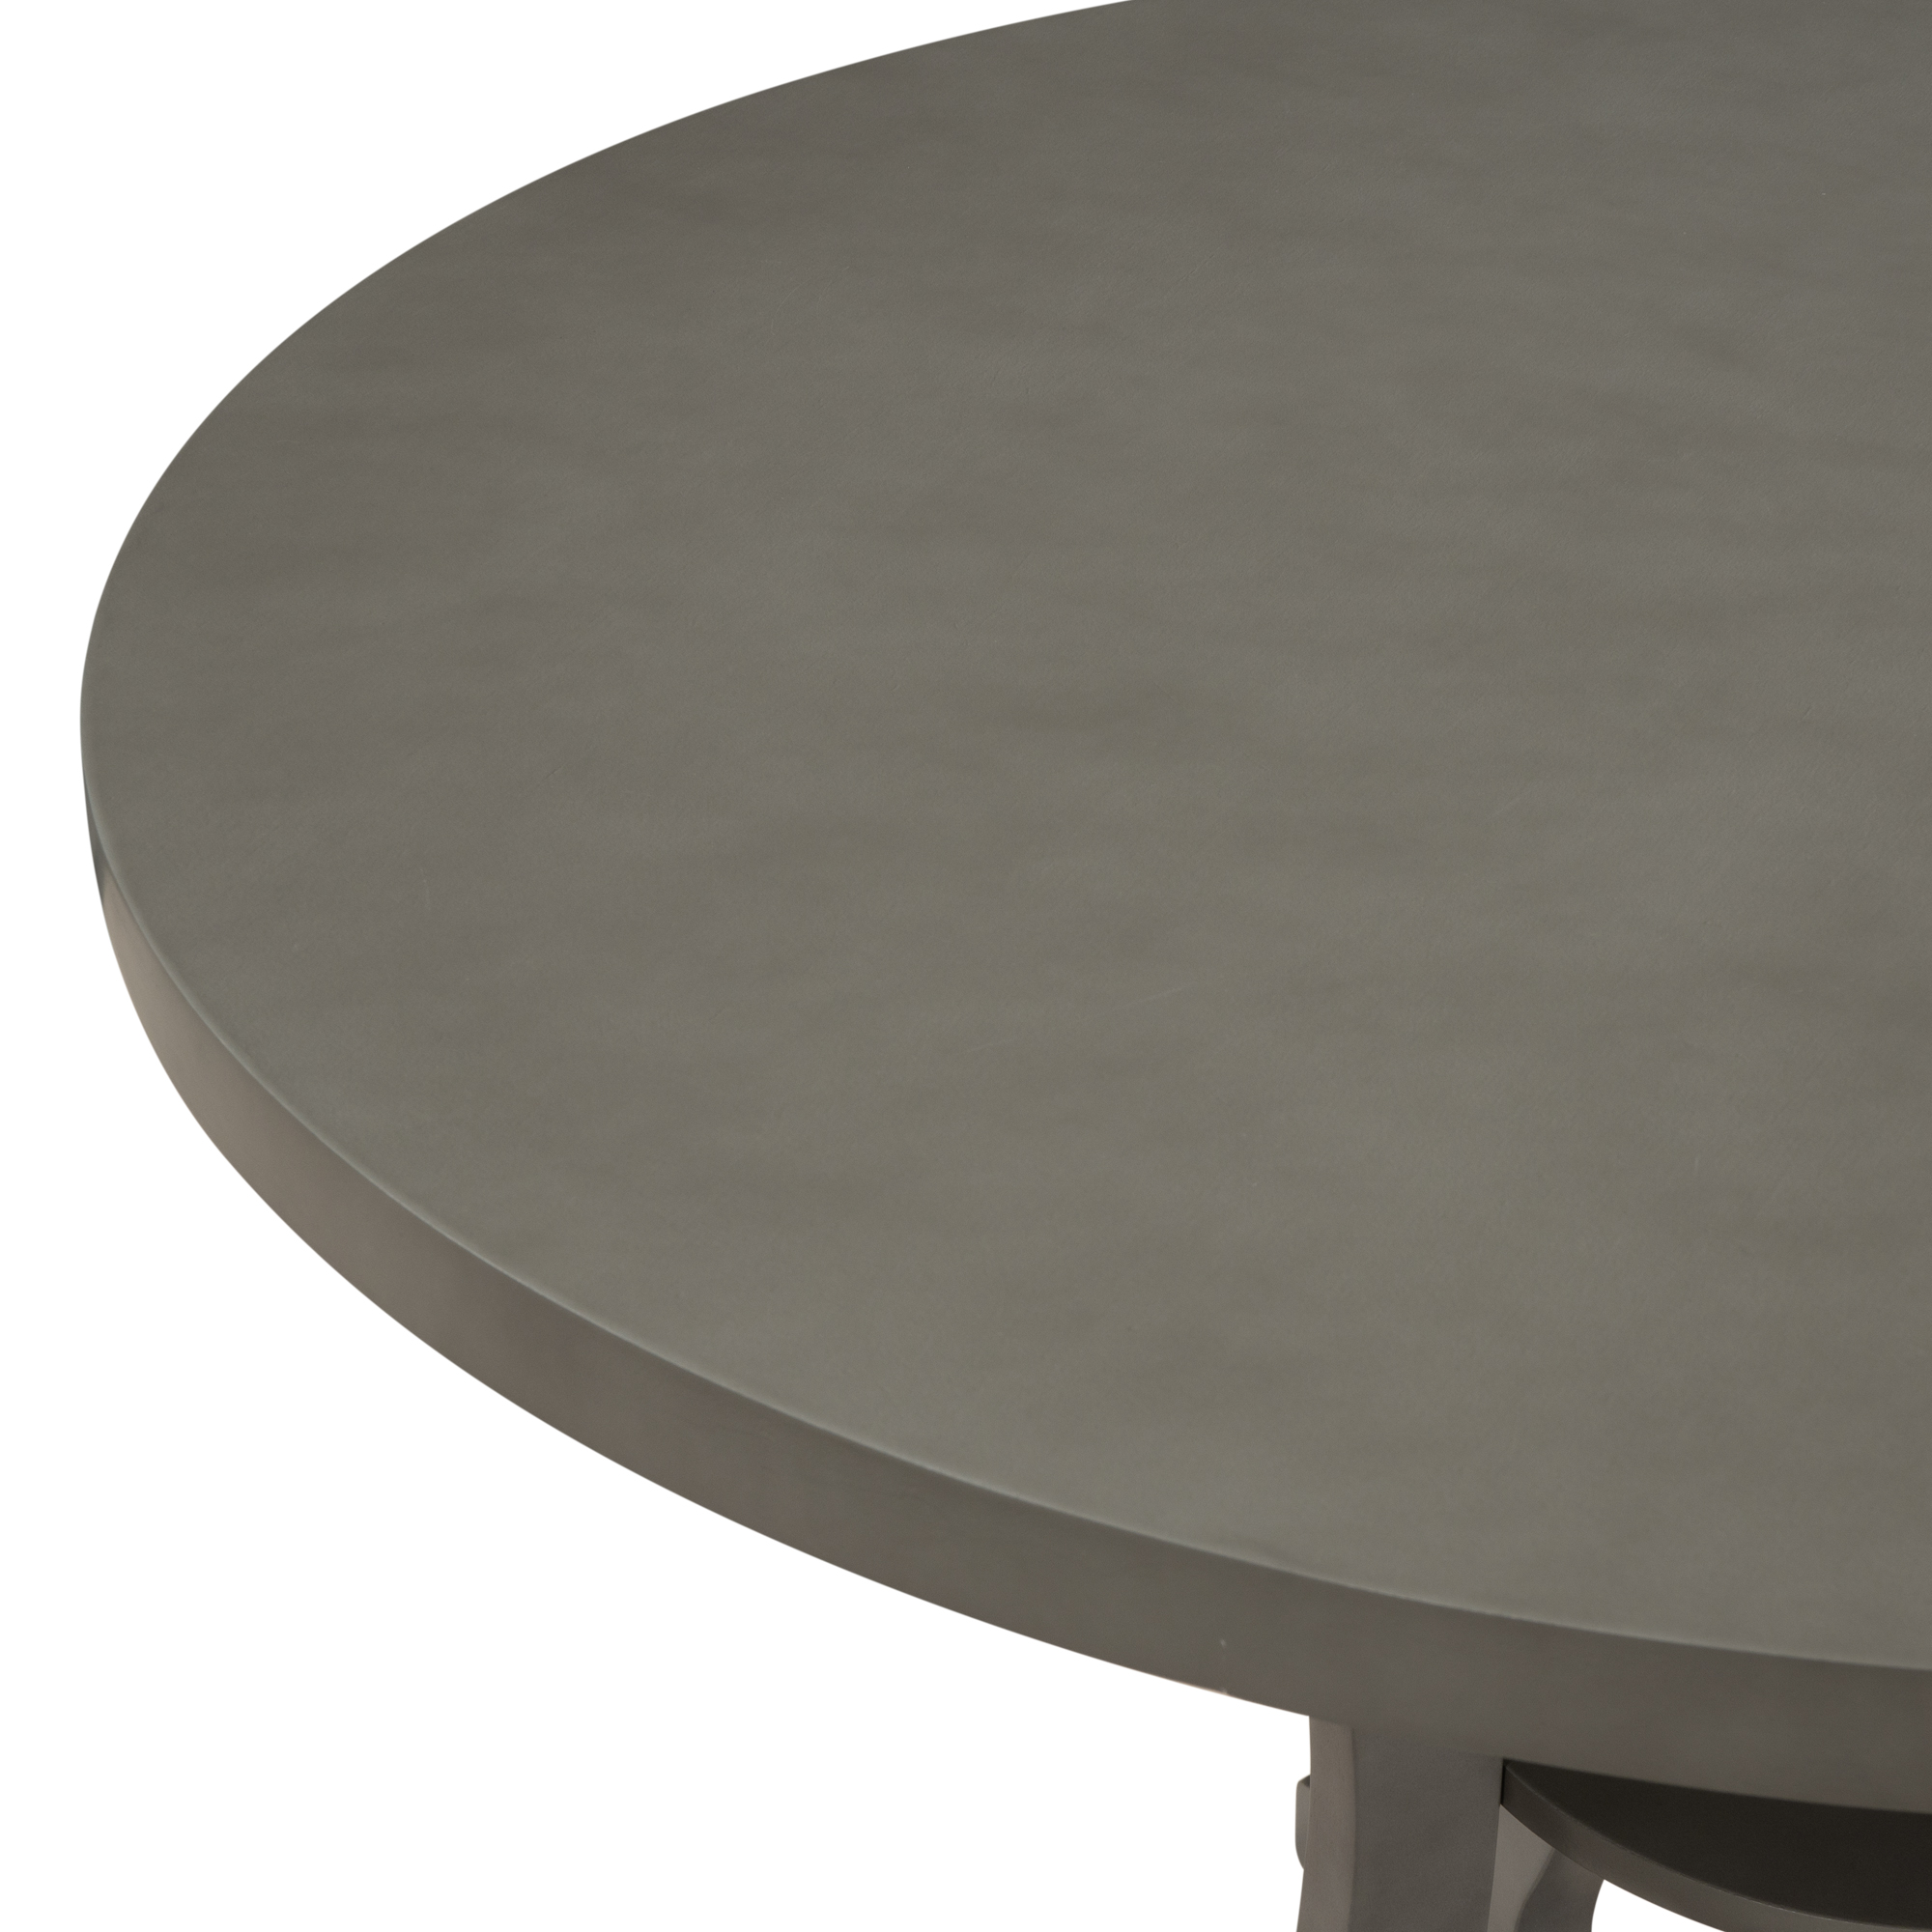 TREXM 5-Piece Round Dining Table and Chair Set - ST000056AAE